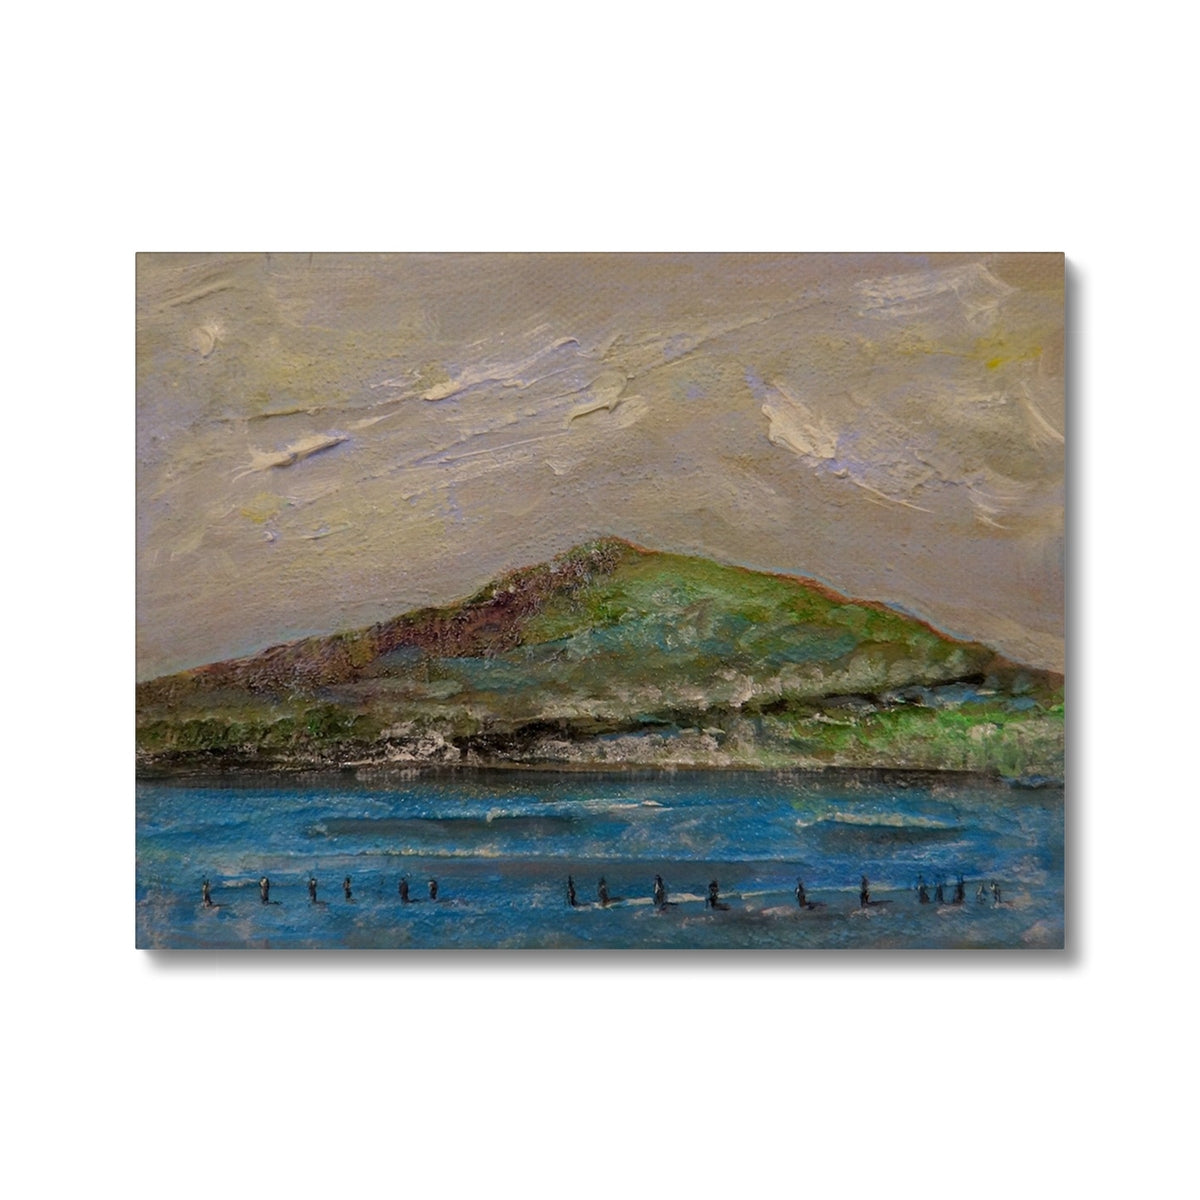 Ben Lomond iii Painting | Canvas From Scotland-Contemporary Stretched Canvas Prints-Scottish Lochs & Mountains Art Gallery-24"x18"-Paintings, Prints, Homeware, Art Gifts From Scotland By Scottish Artist Kevin Hunter